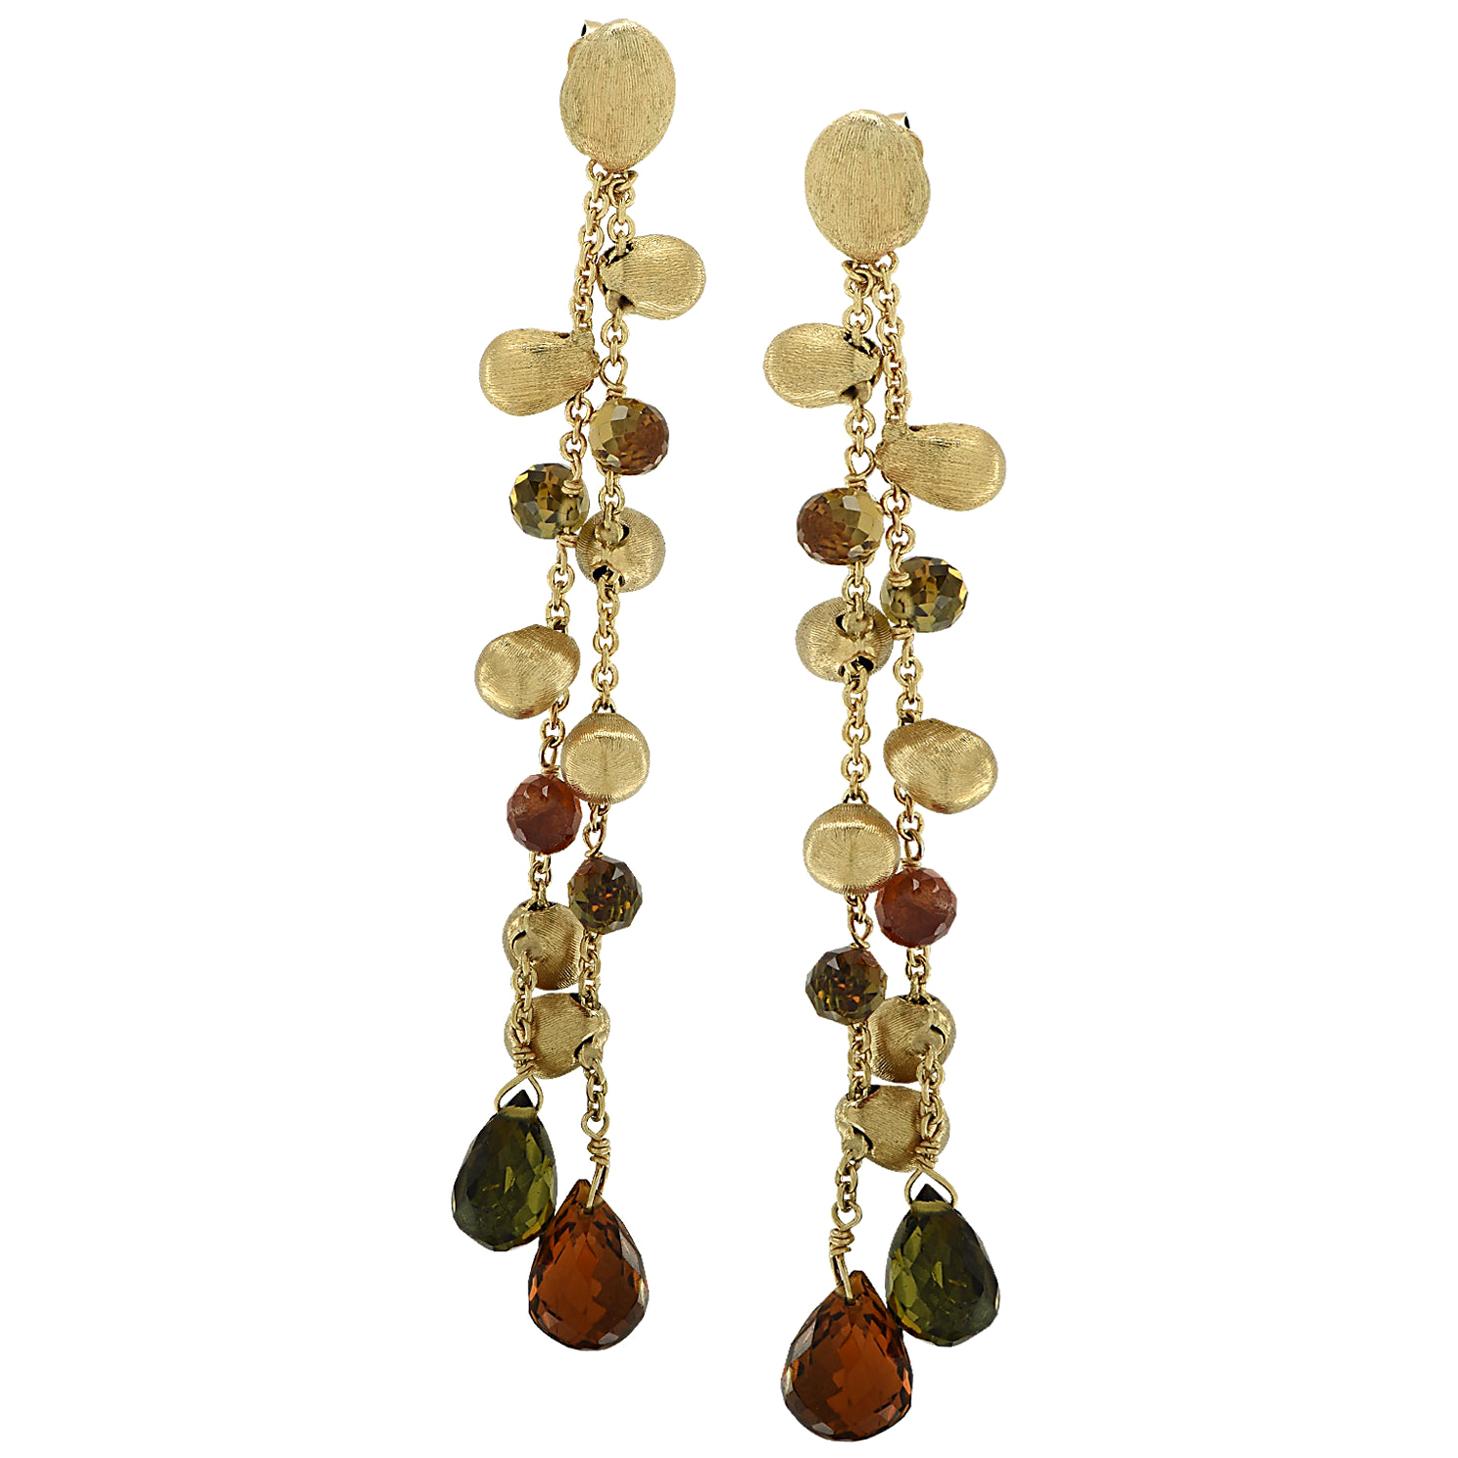 Marco Bicego Italy, Peridot and Citrine Paradise Double-Strand Dangle Earrings